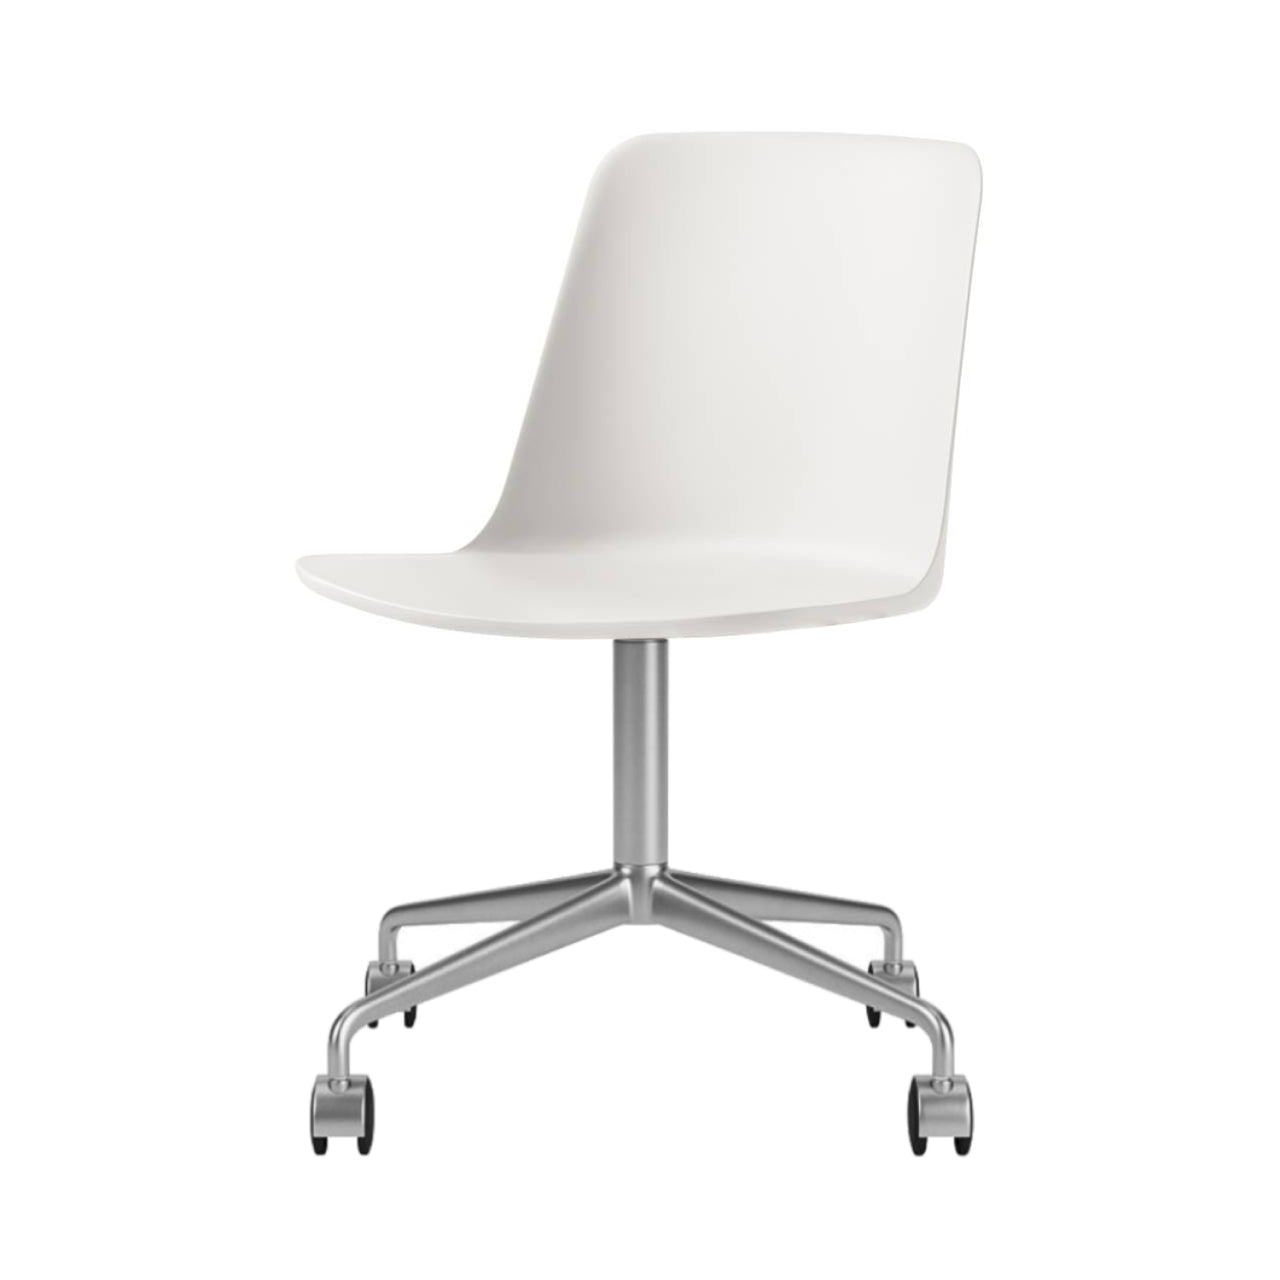 Rely Chair HW21: White + Polished Aluminum